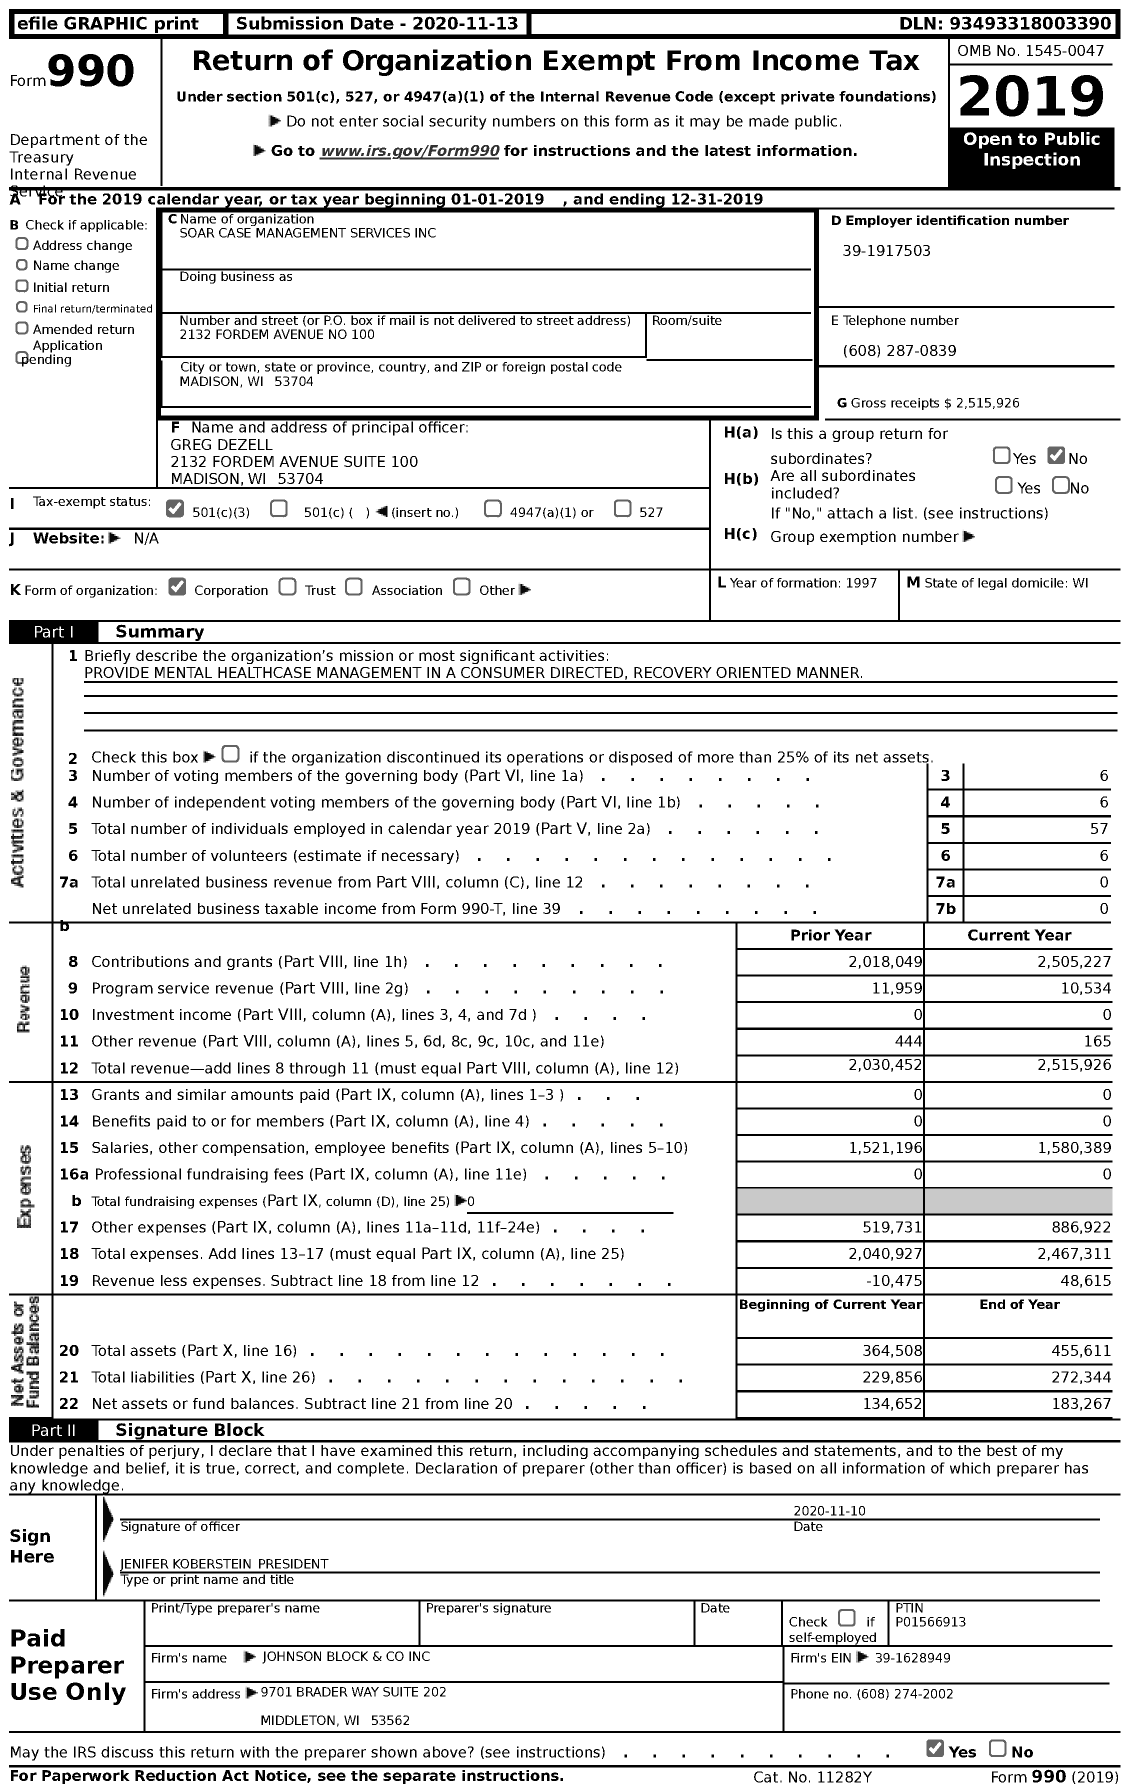 Image of first page of 2019 Form 990 for Soar Case Management Services